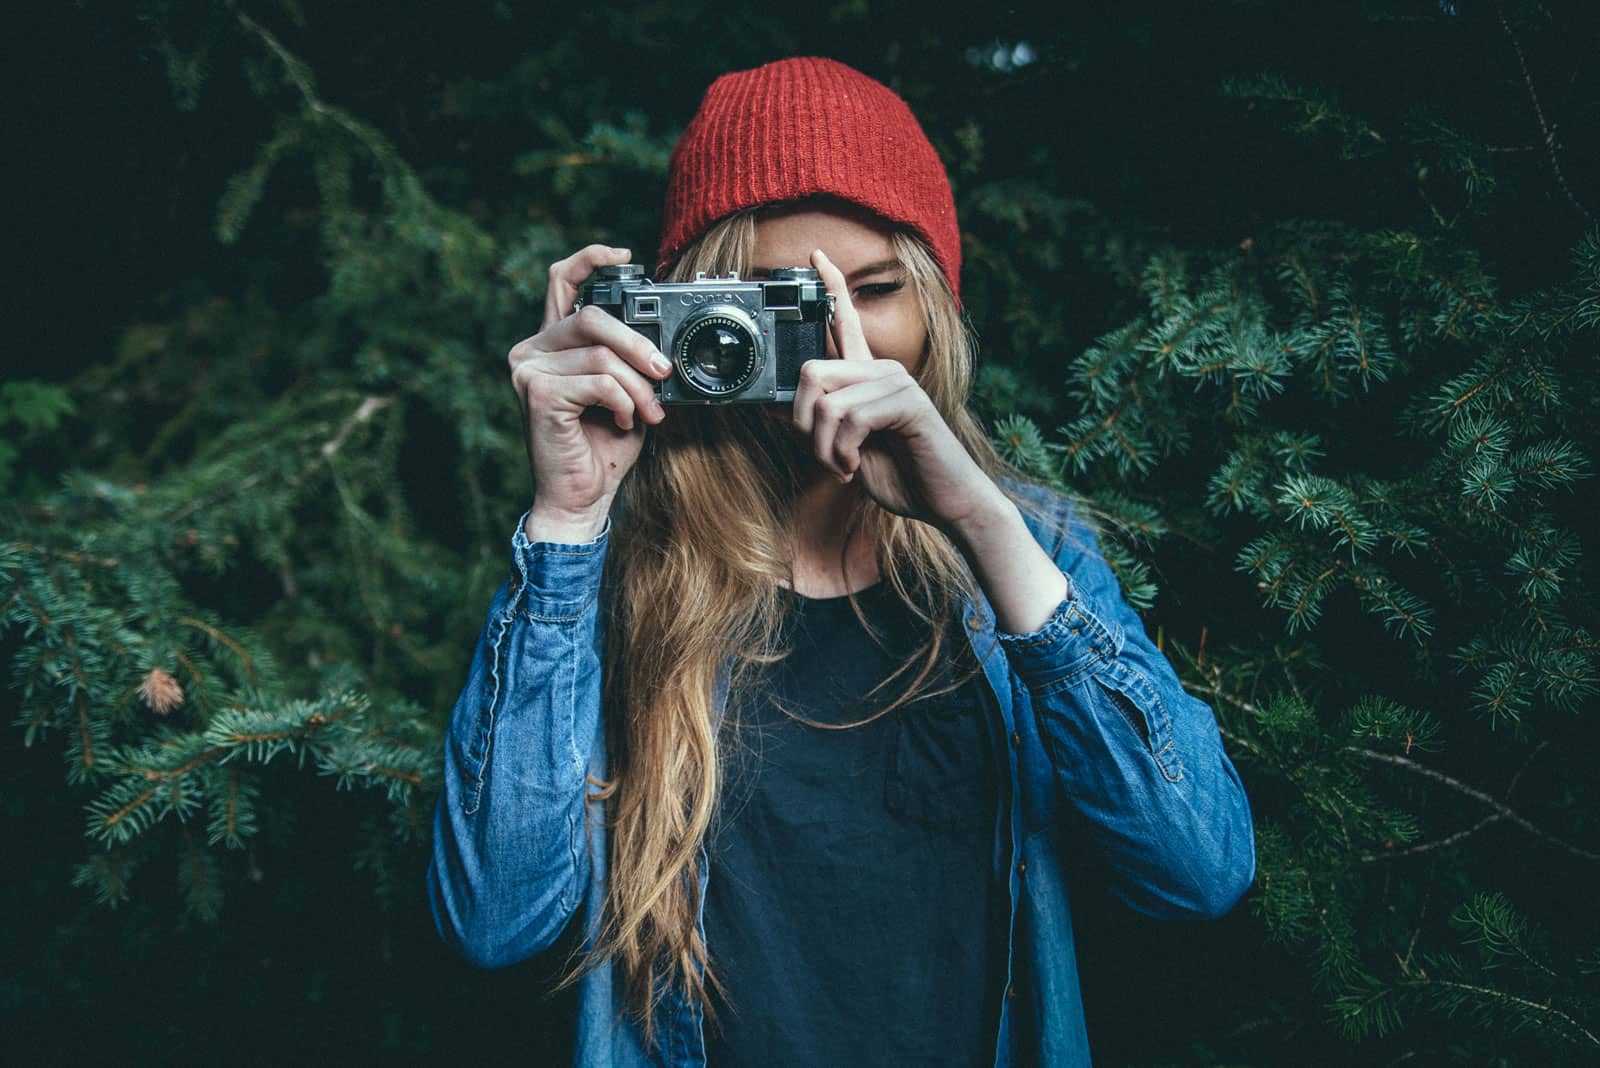 This startup uses photography to empower women around the world